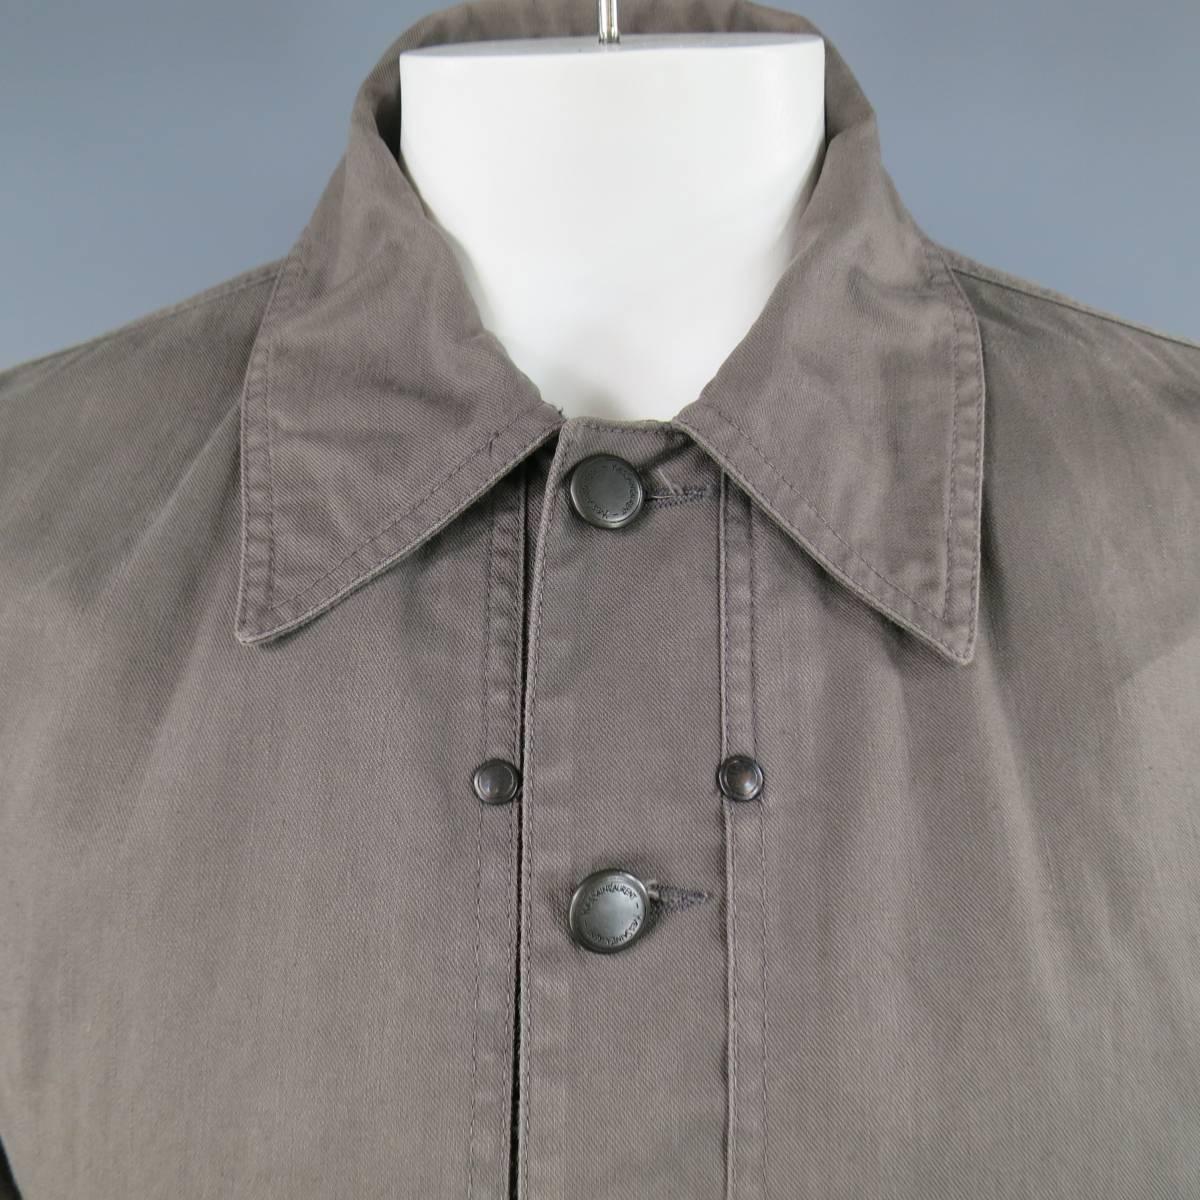 This rare YVES SAINT LAURENT trucker style jacket comes in a light weight taupe gray cotton denim and features a pointed collar engraved gunmetal tone buttons, work wear inspired overlay pocket panels, internal panel closure, and back tabs. Made in